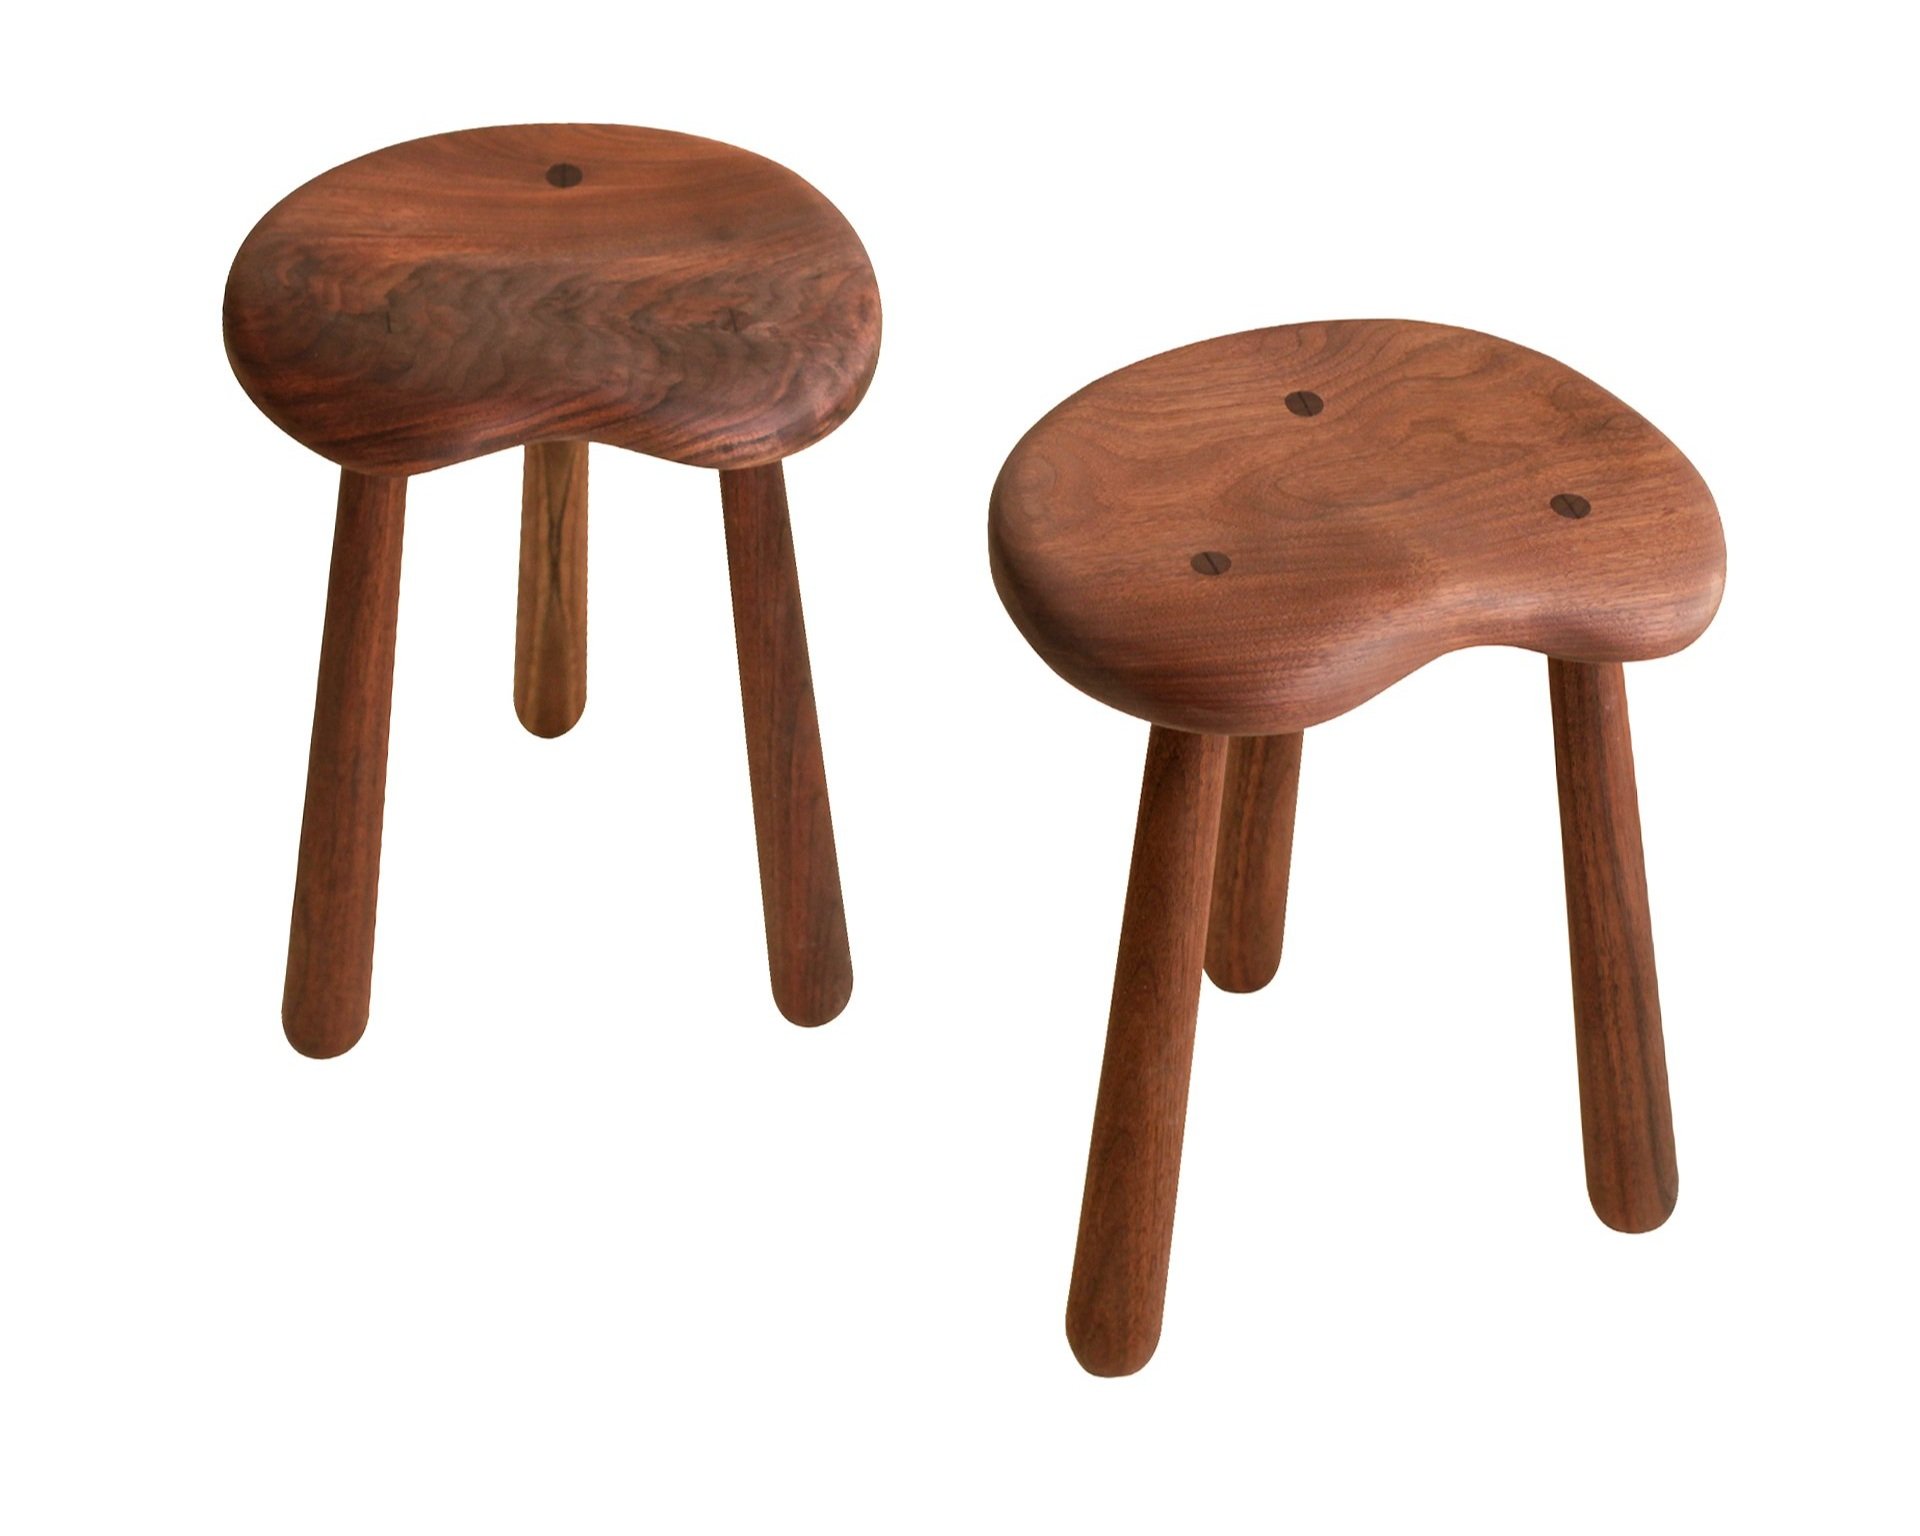 The Tractor Stool